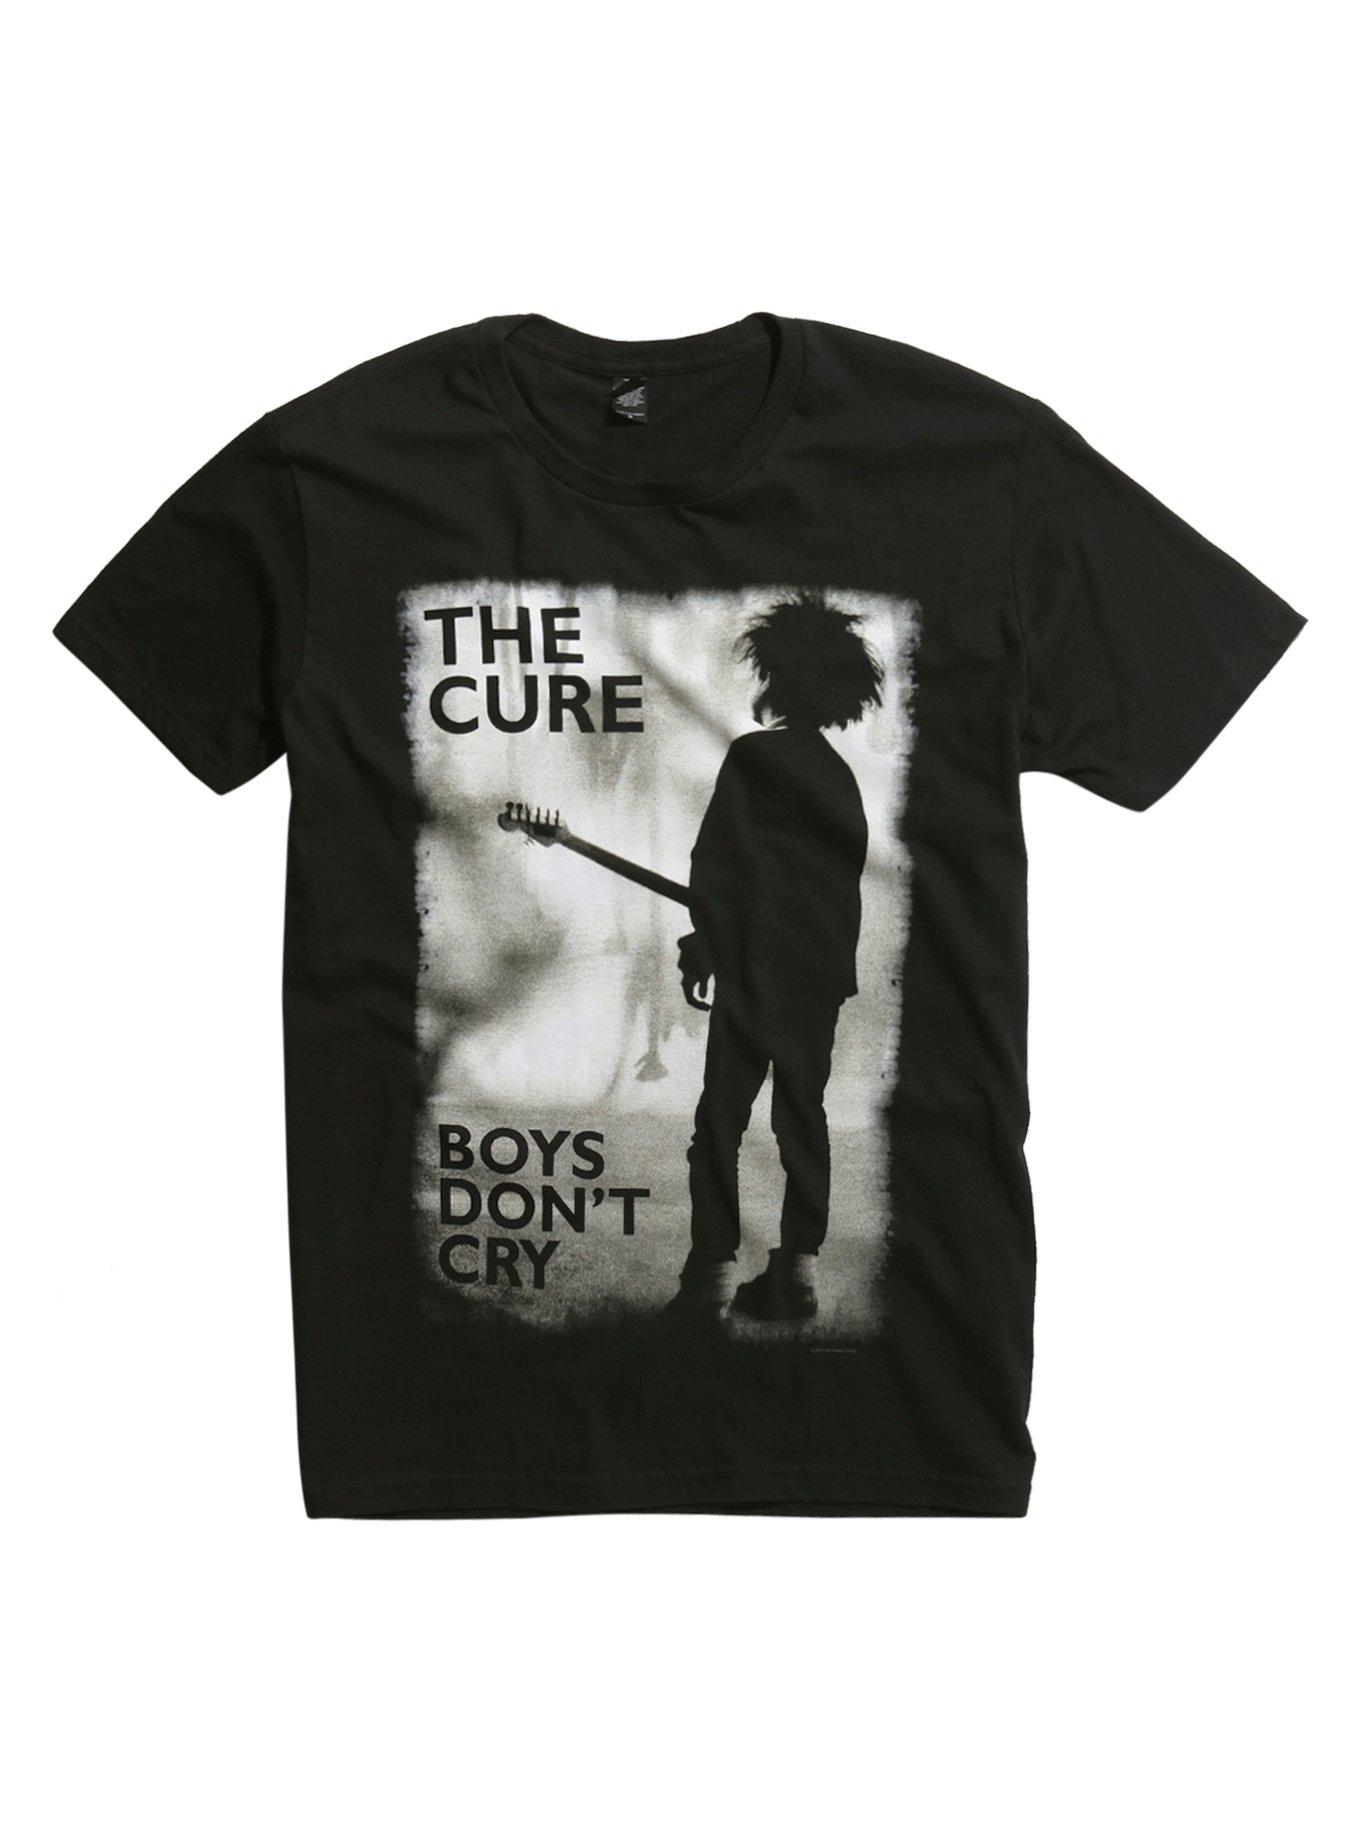 The Cure Boys Don't Cry T-Shirt | Hot Topic